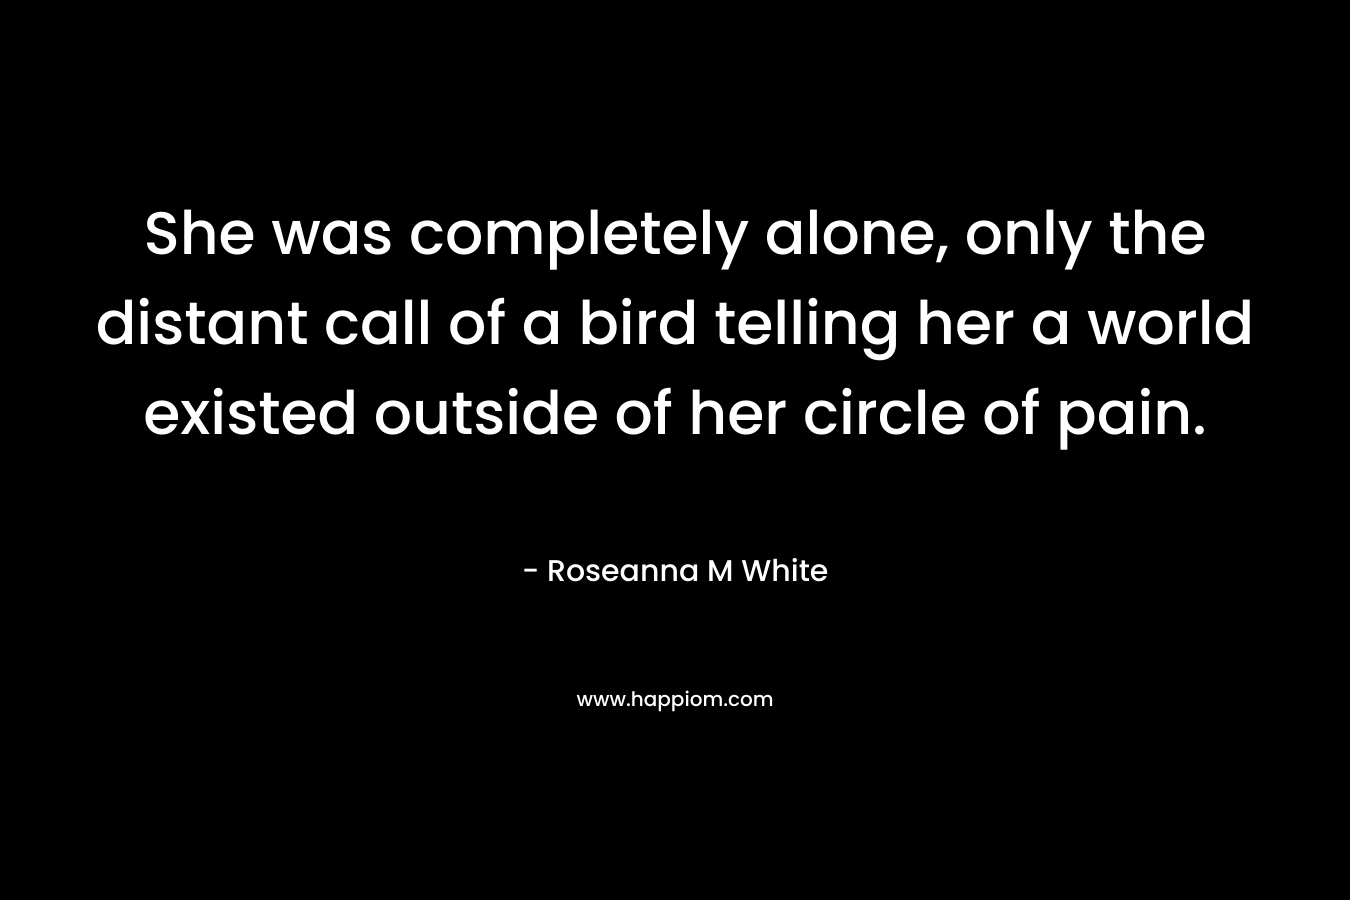 She was completely alone, only the distant call of a bird telling her a world existed outside of her circle of pain.